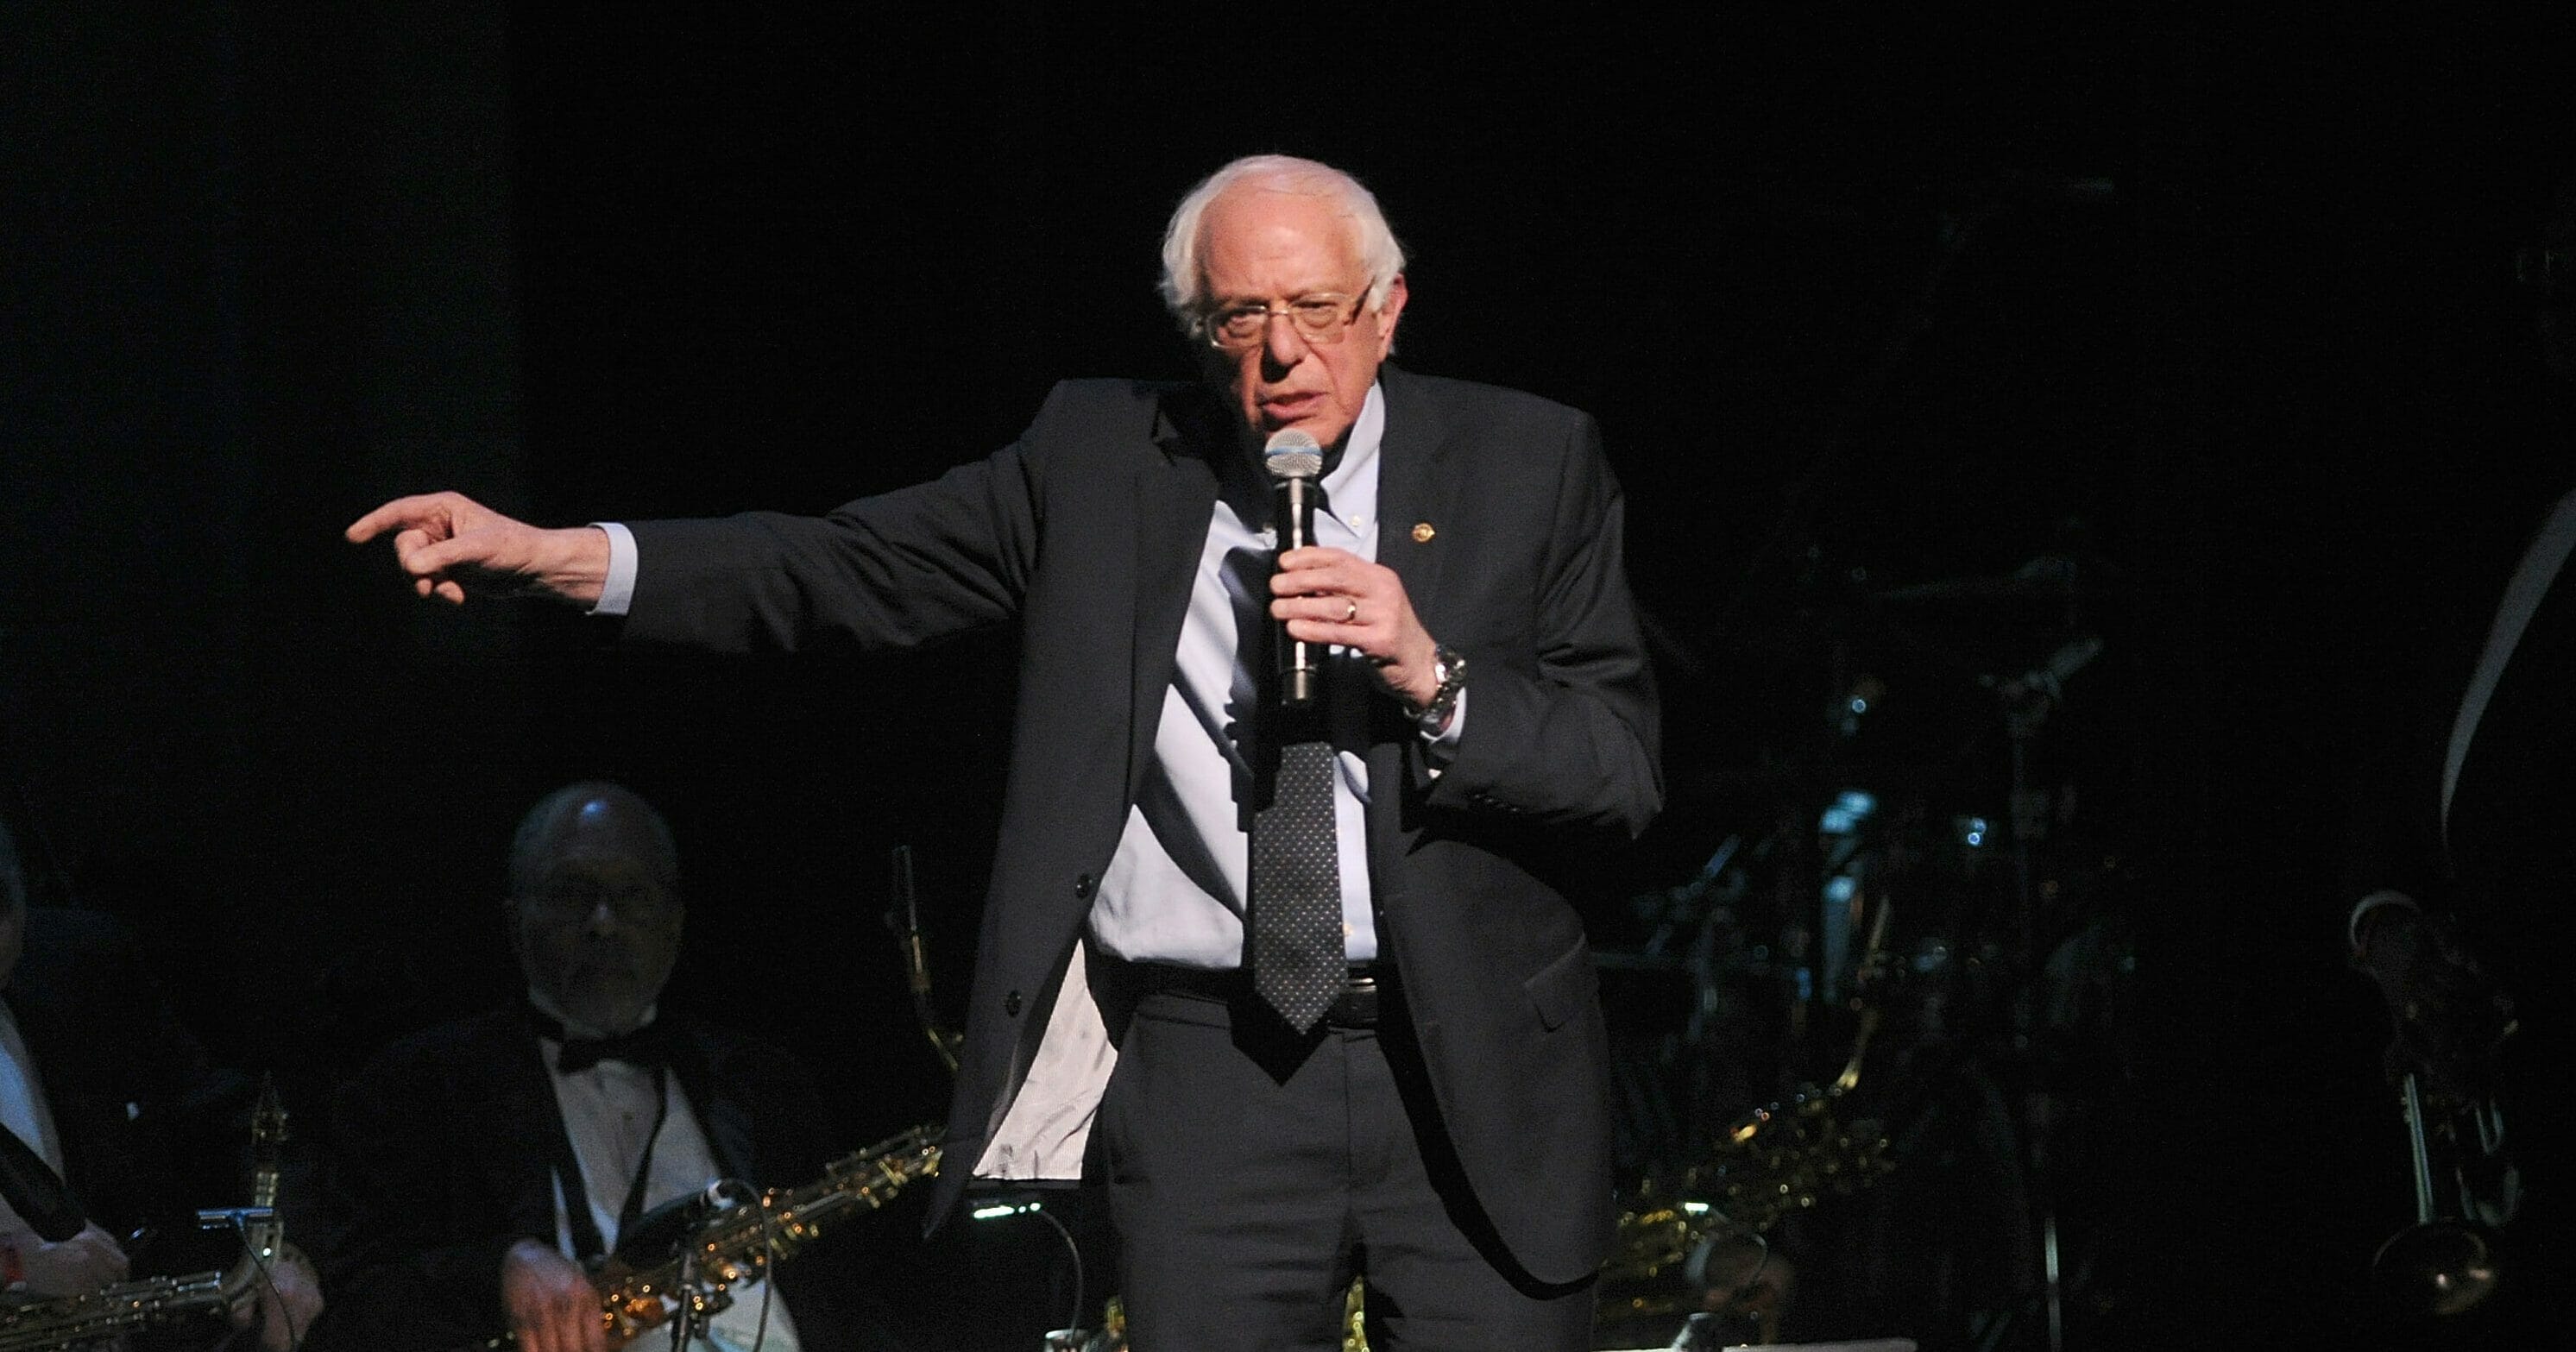 2020 Democratic presidential candidate Bernie Sanders appears onstage at the Jazz Foundation of America's 17th annual "A Great Night In Harlem" concert at the Apollo Theater on Thursday, April 4, 2019, in New York.